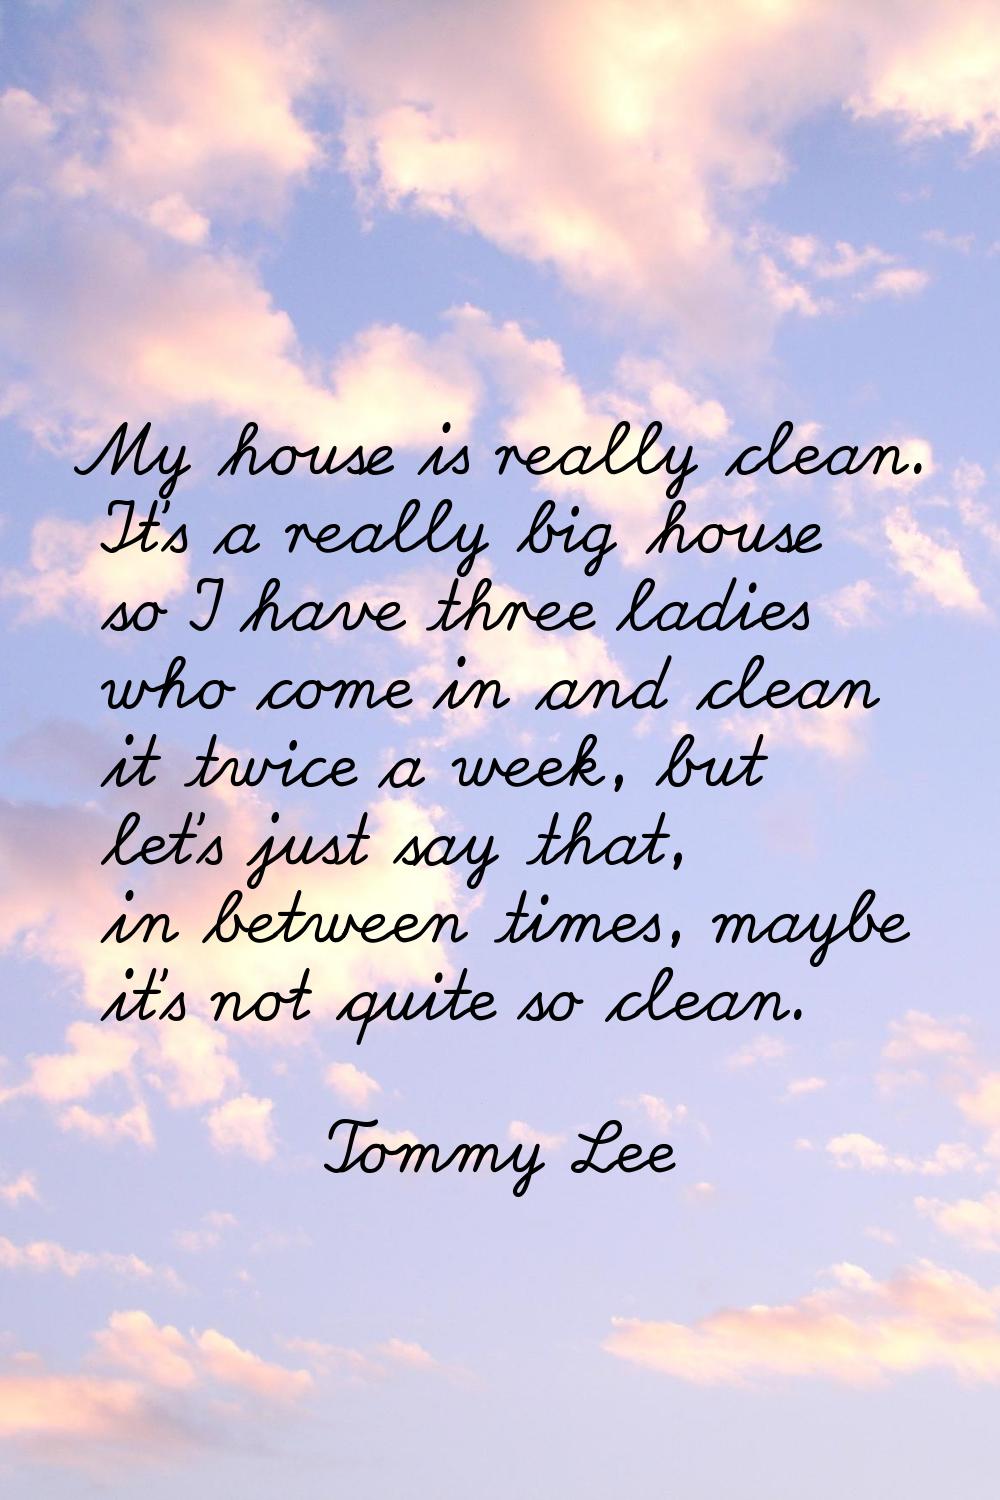 My house is really clean. It's a really big house so I have three ladies who come in and clean it t